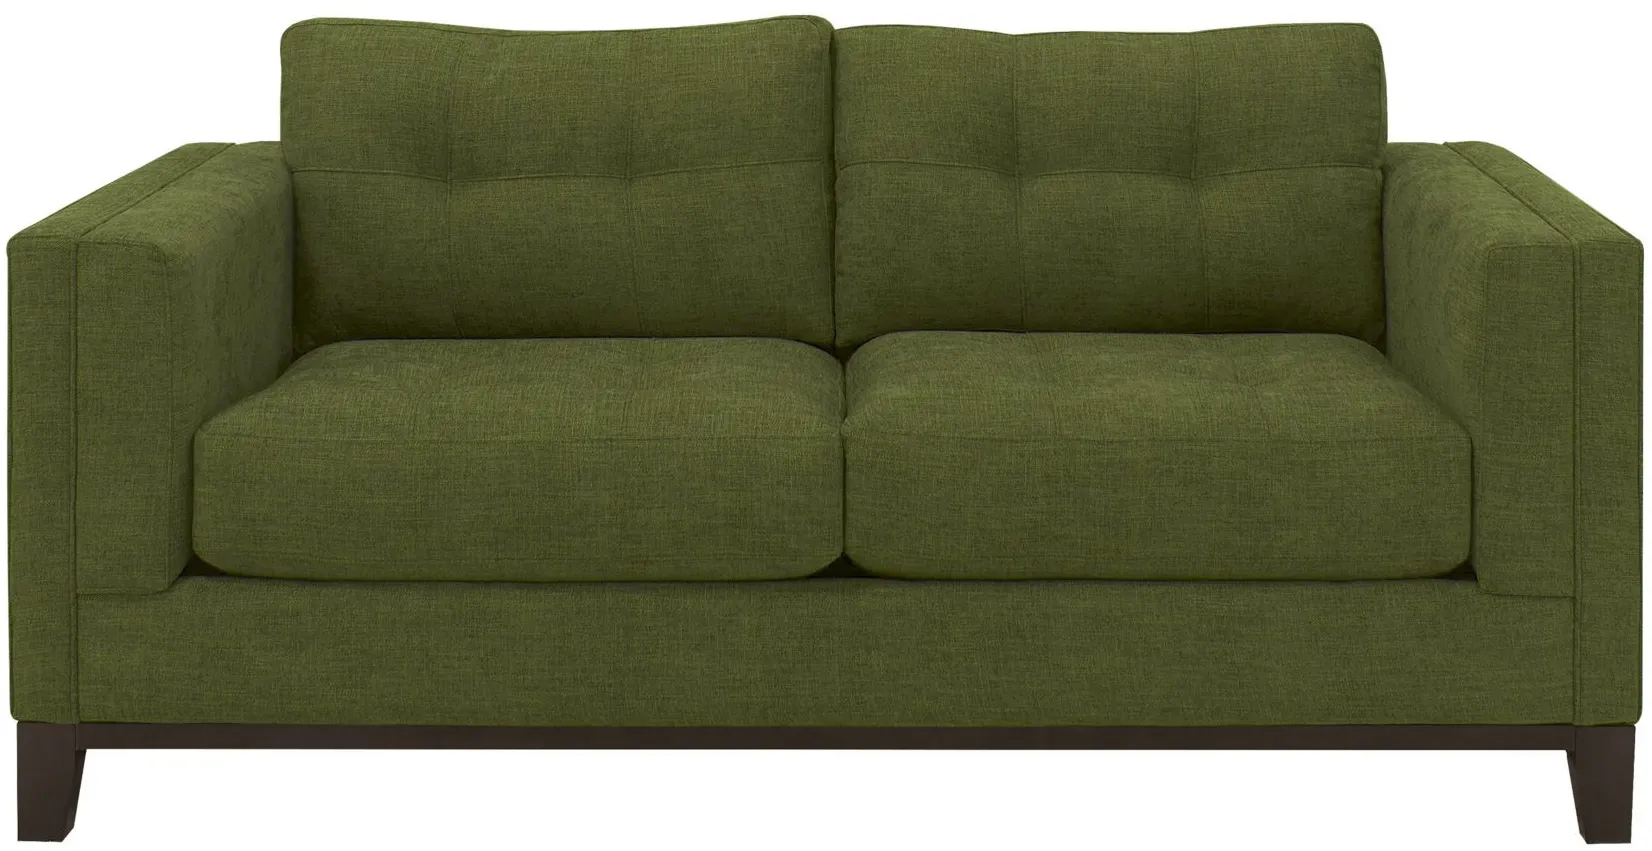 Mirasol Loveseat in Suede so Soft Pine by H.M. Richards